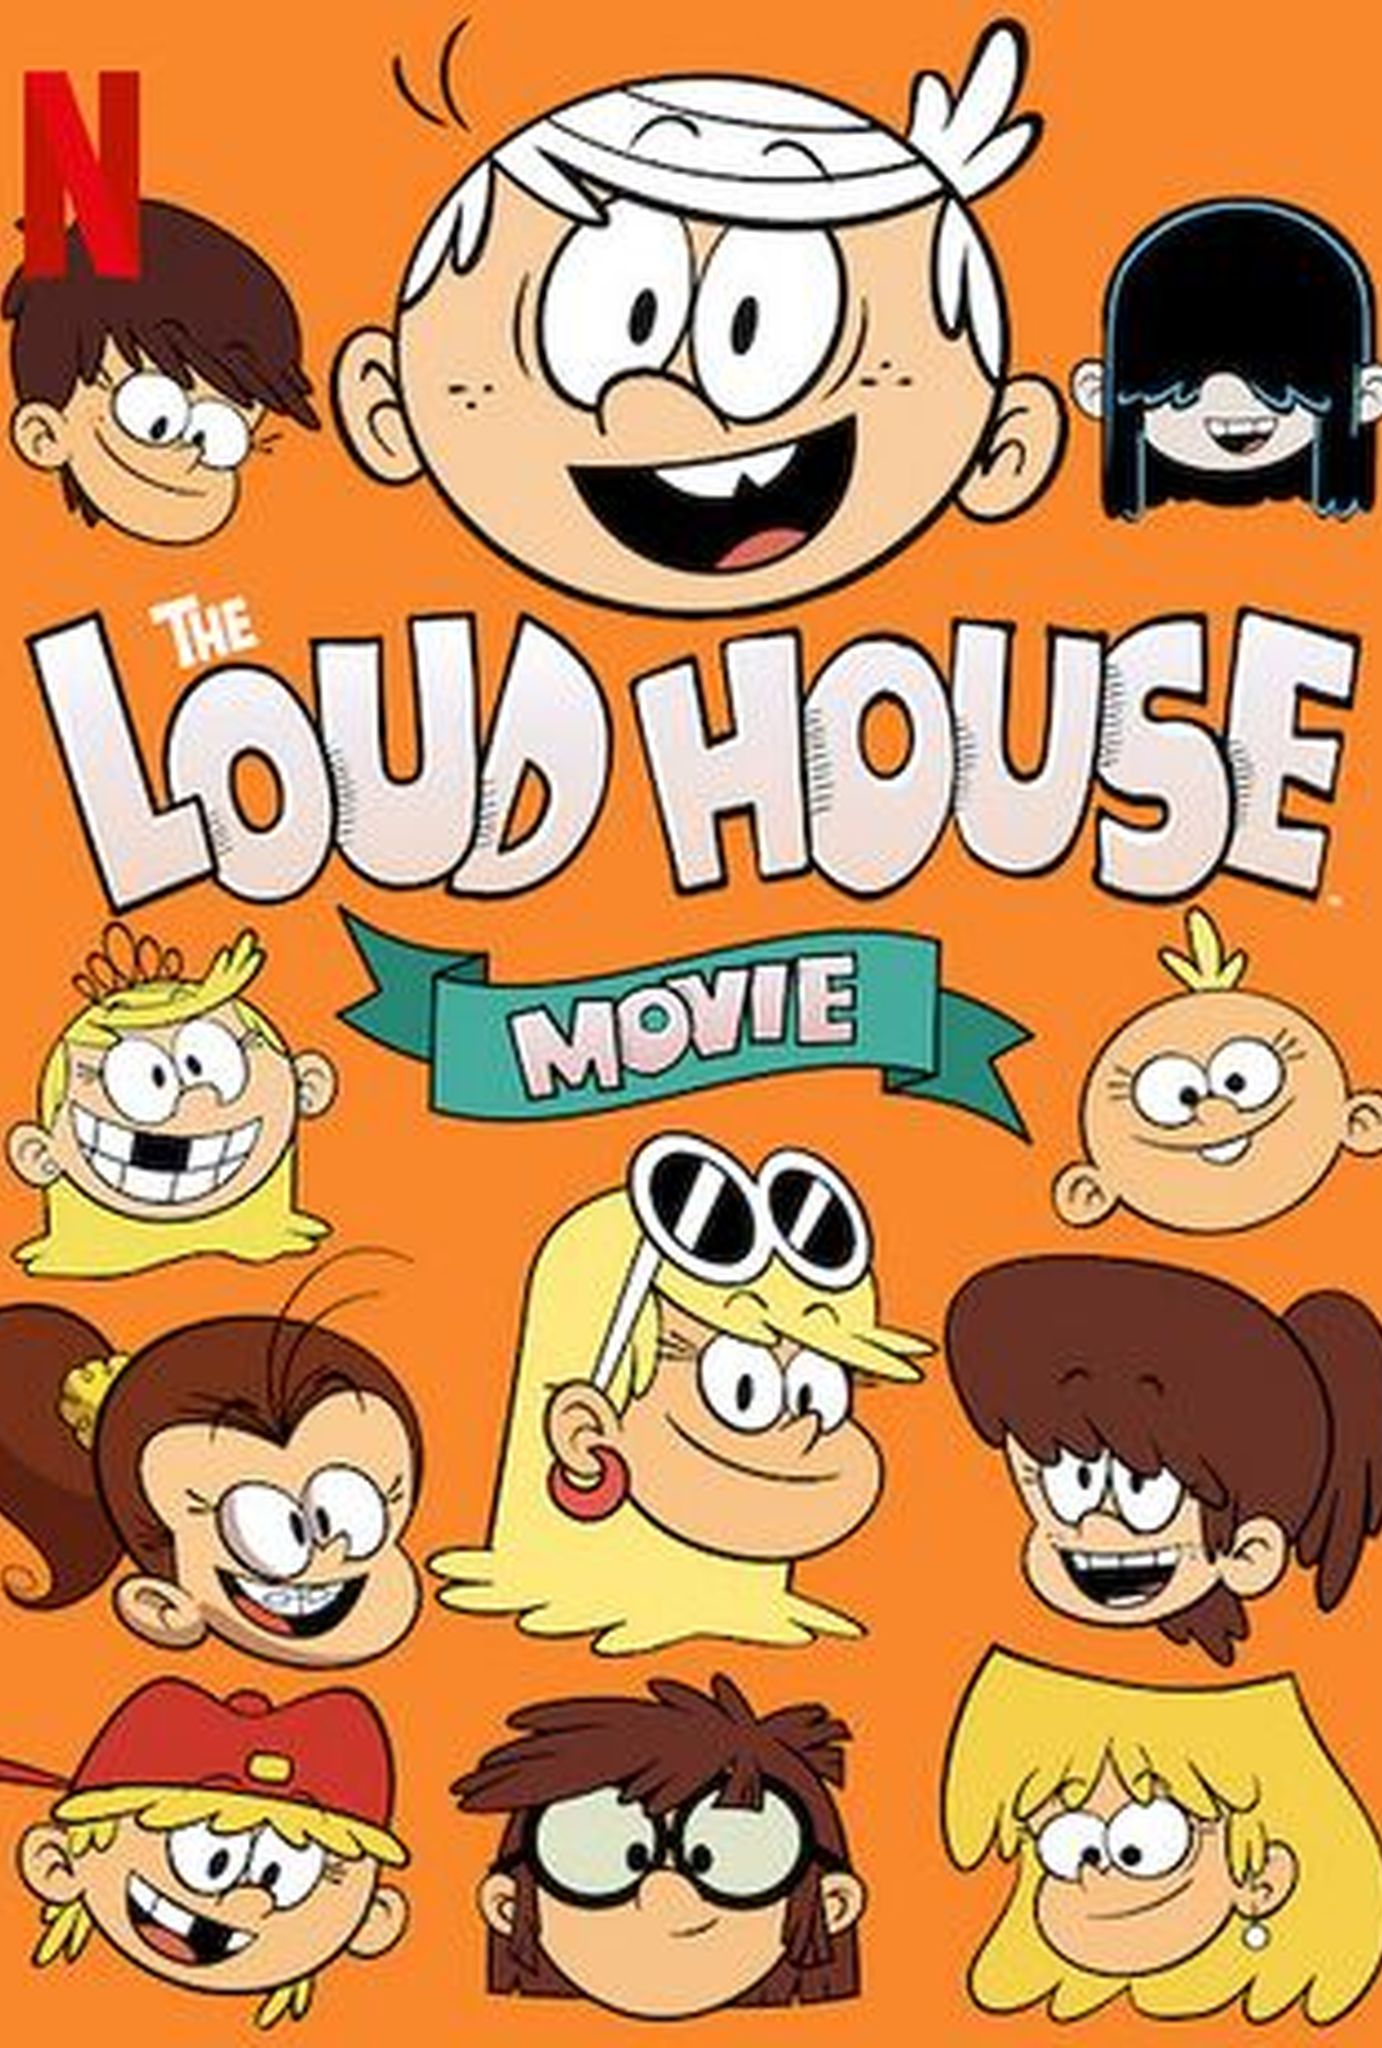 The Loud House Movie (with Philip White) poster